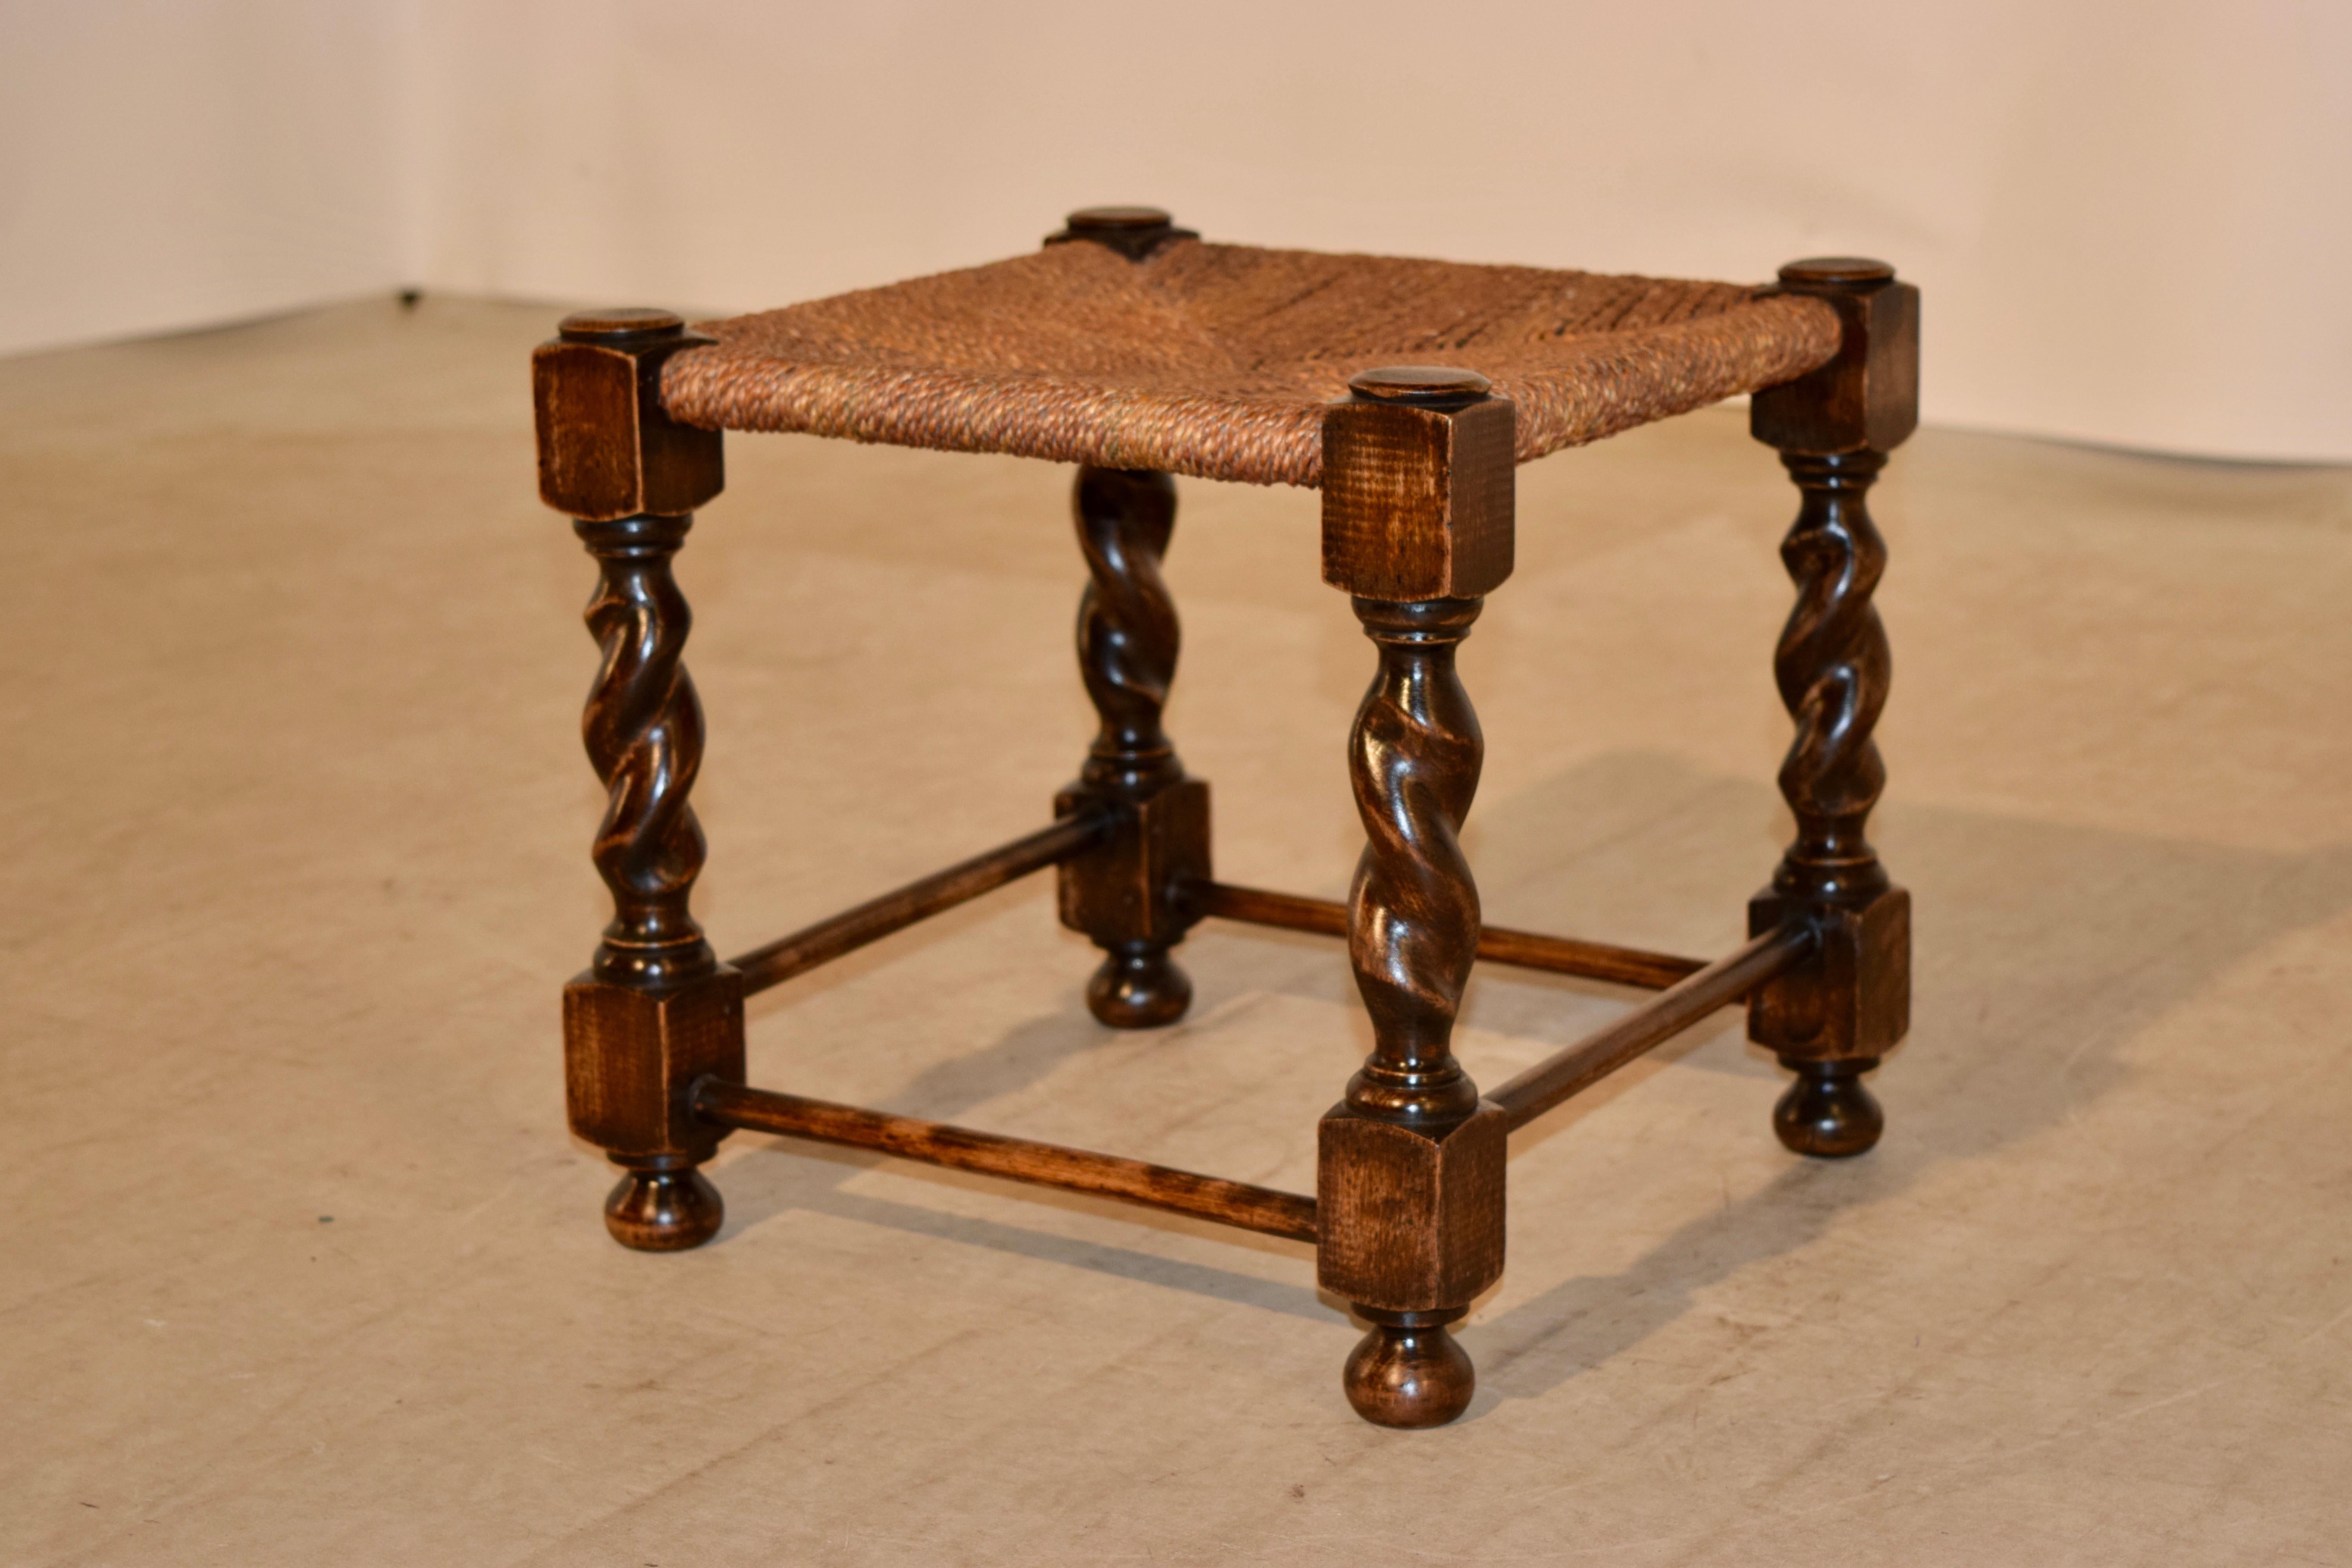 19th century English oak foot stool with hand-turned barley twist legs joined by simple stretchers and hand-turned feet. The top is handwoven rush.